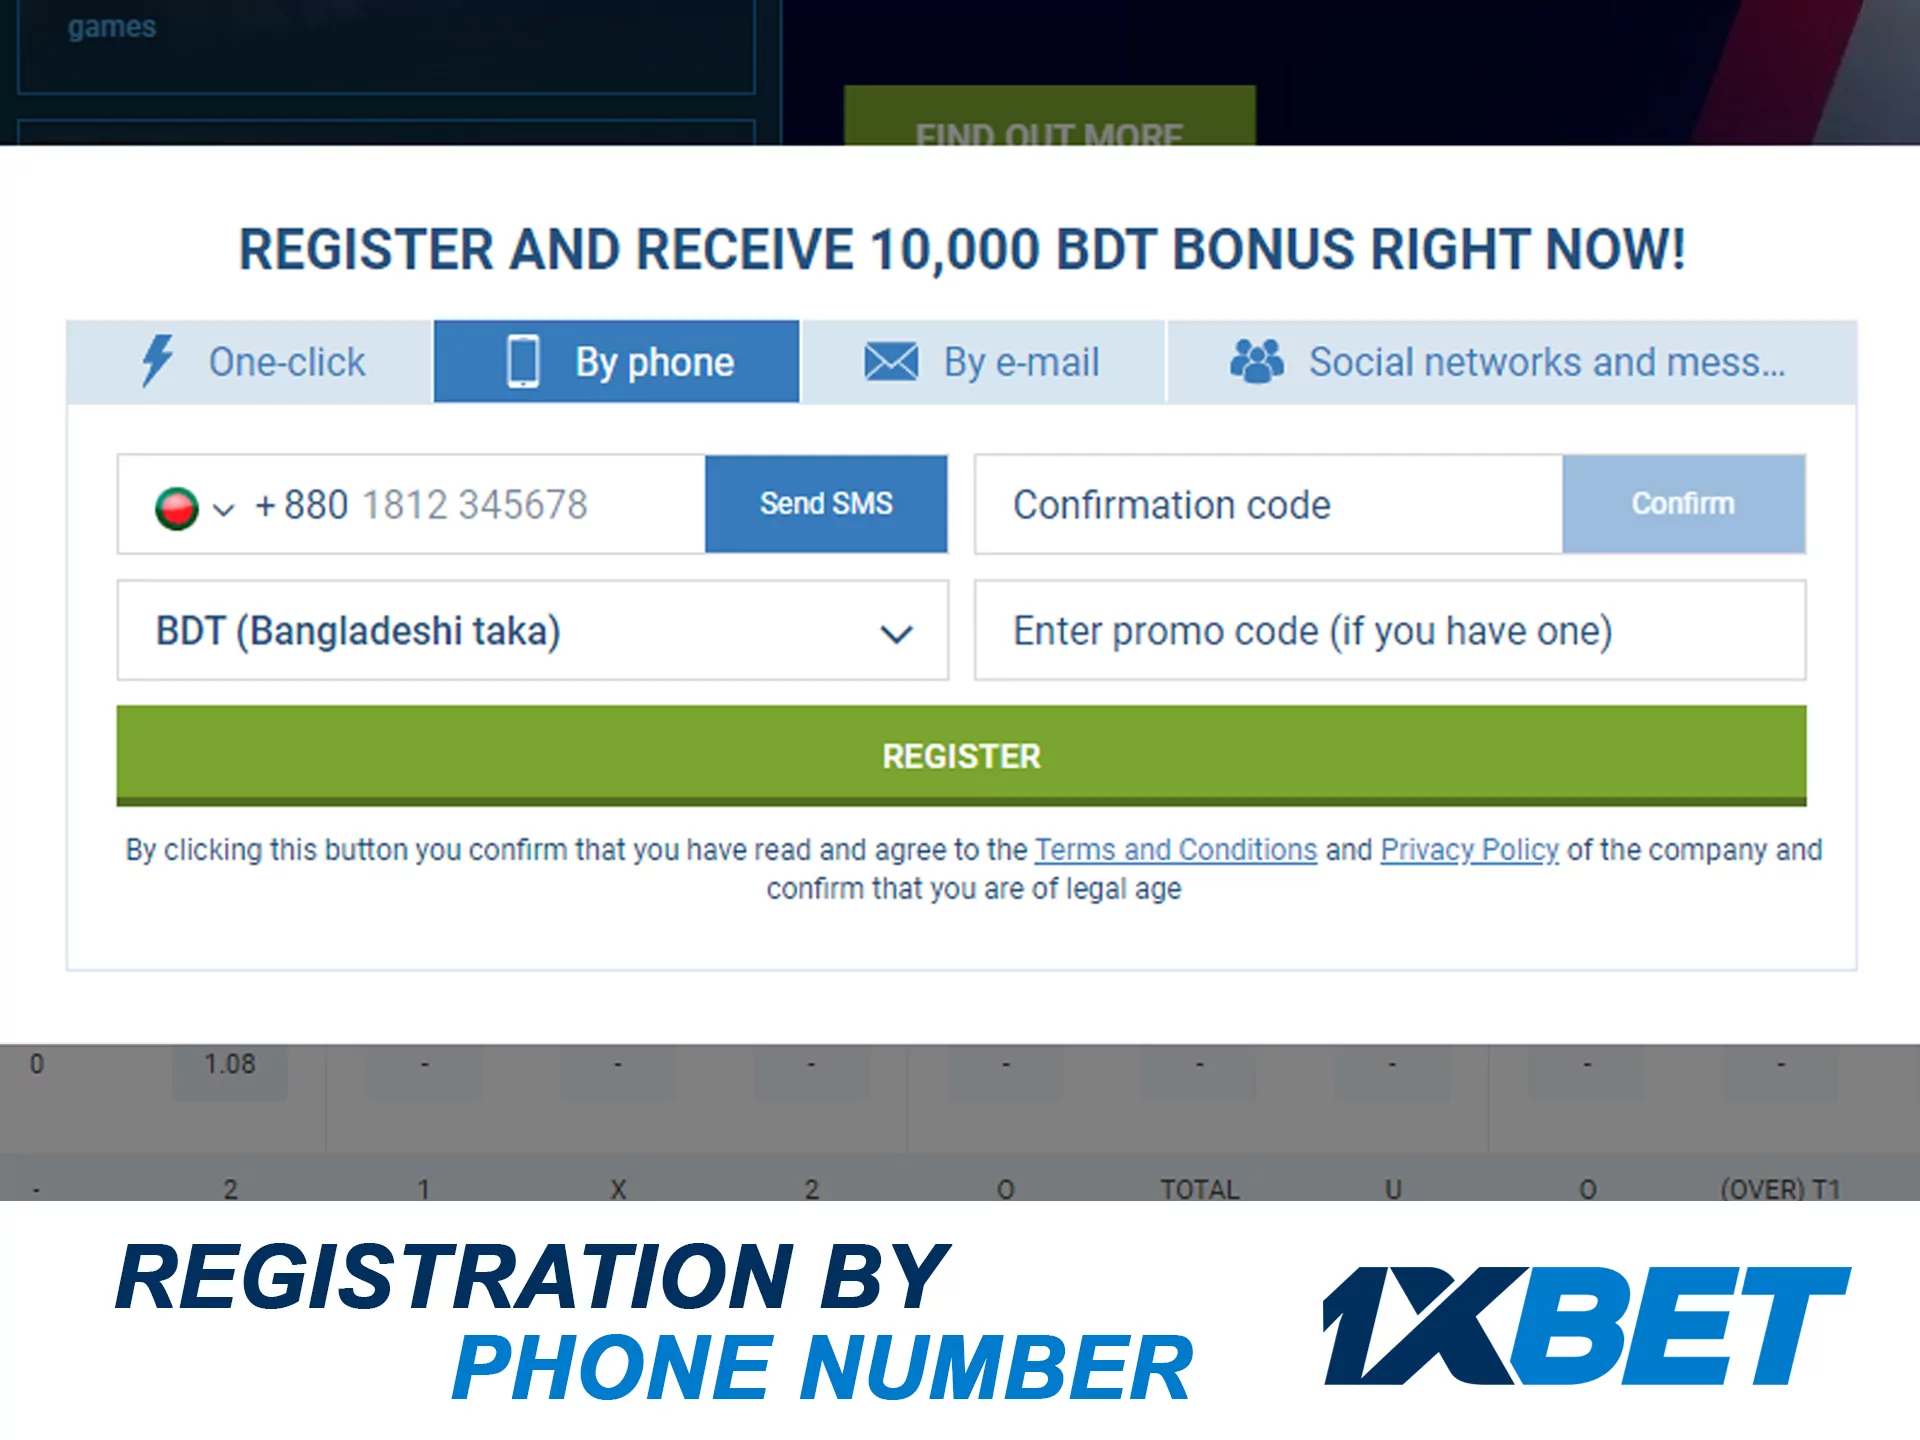 Registrate at 1xbet using your mobile phone.